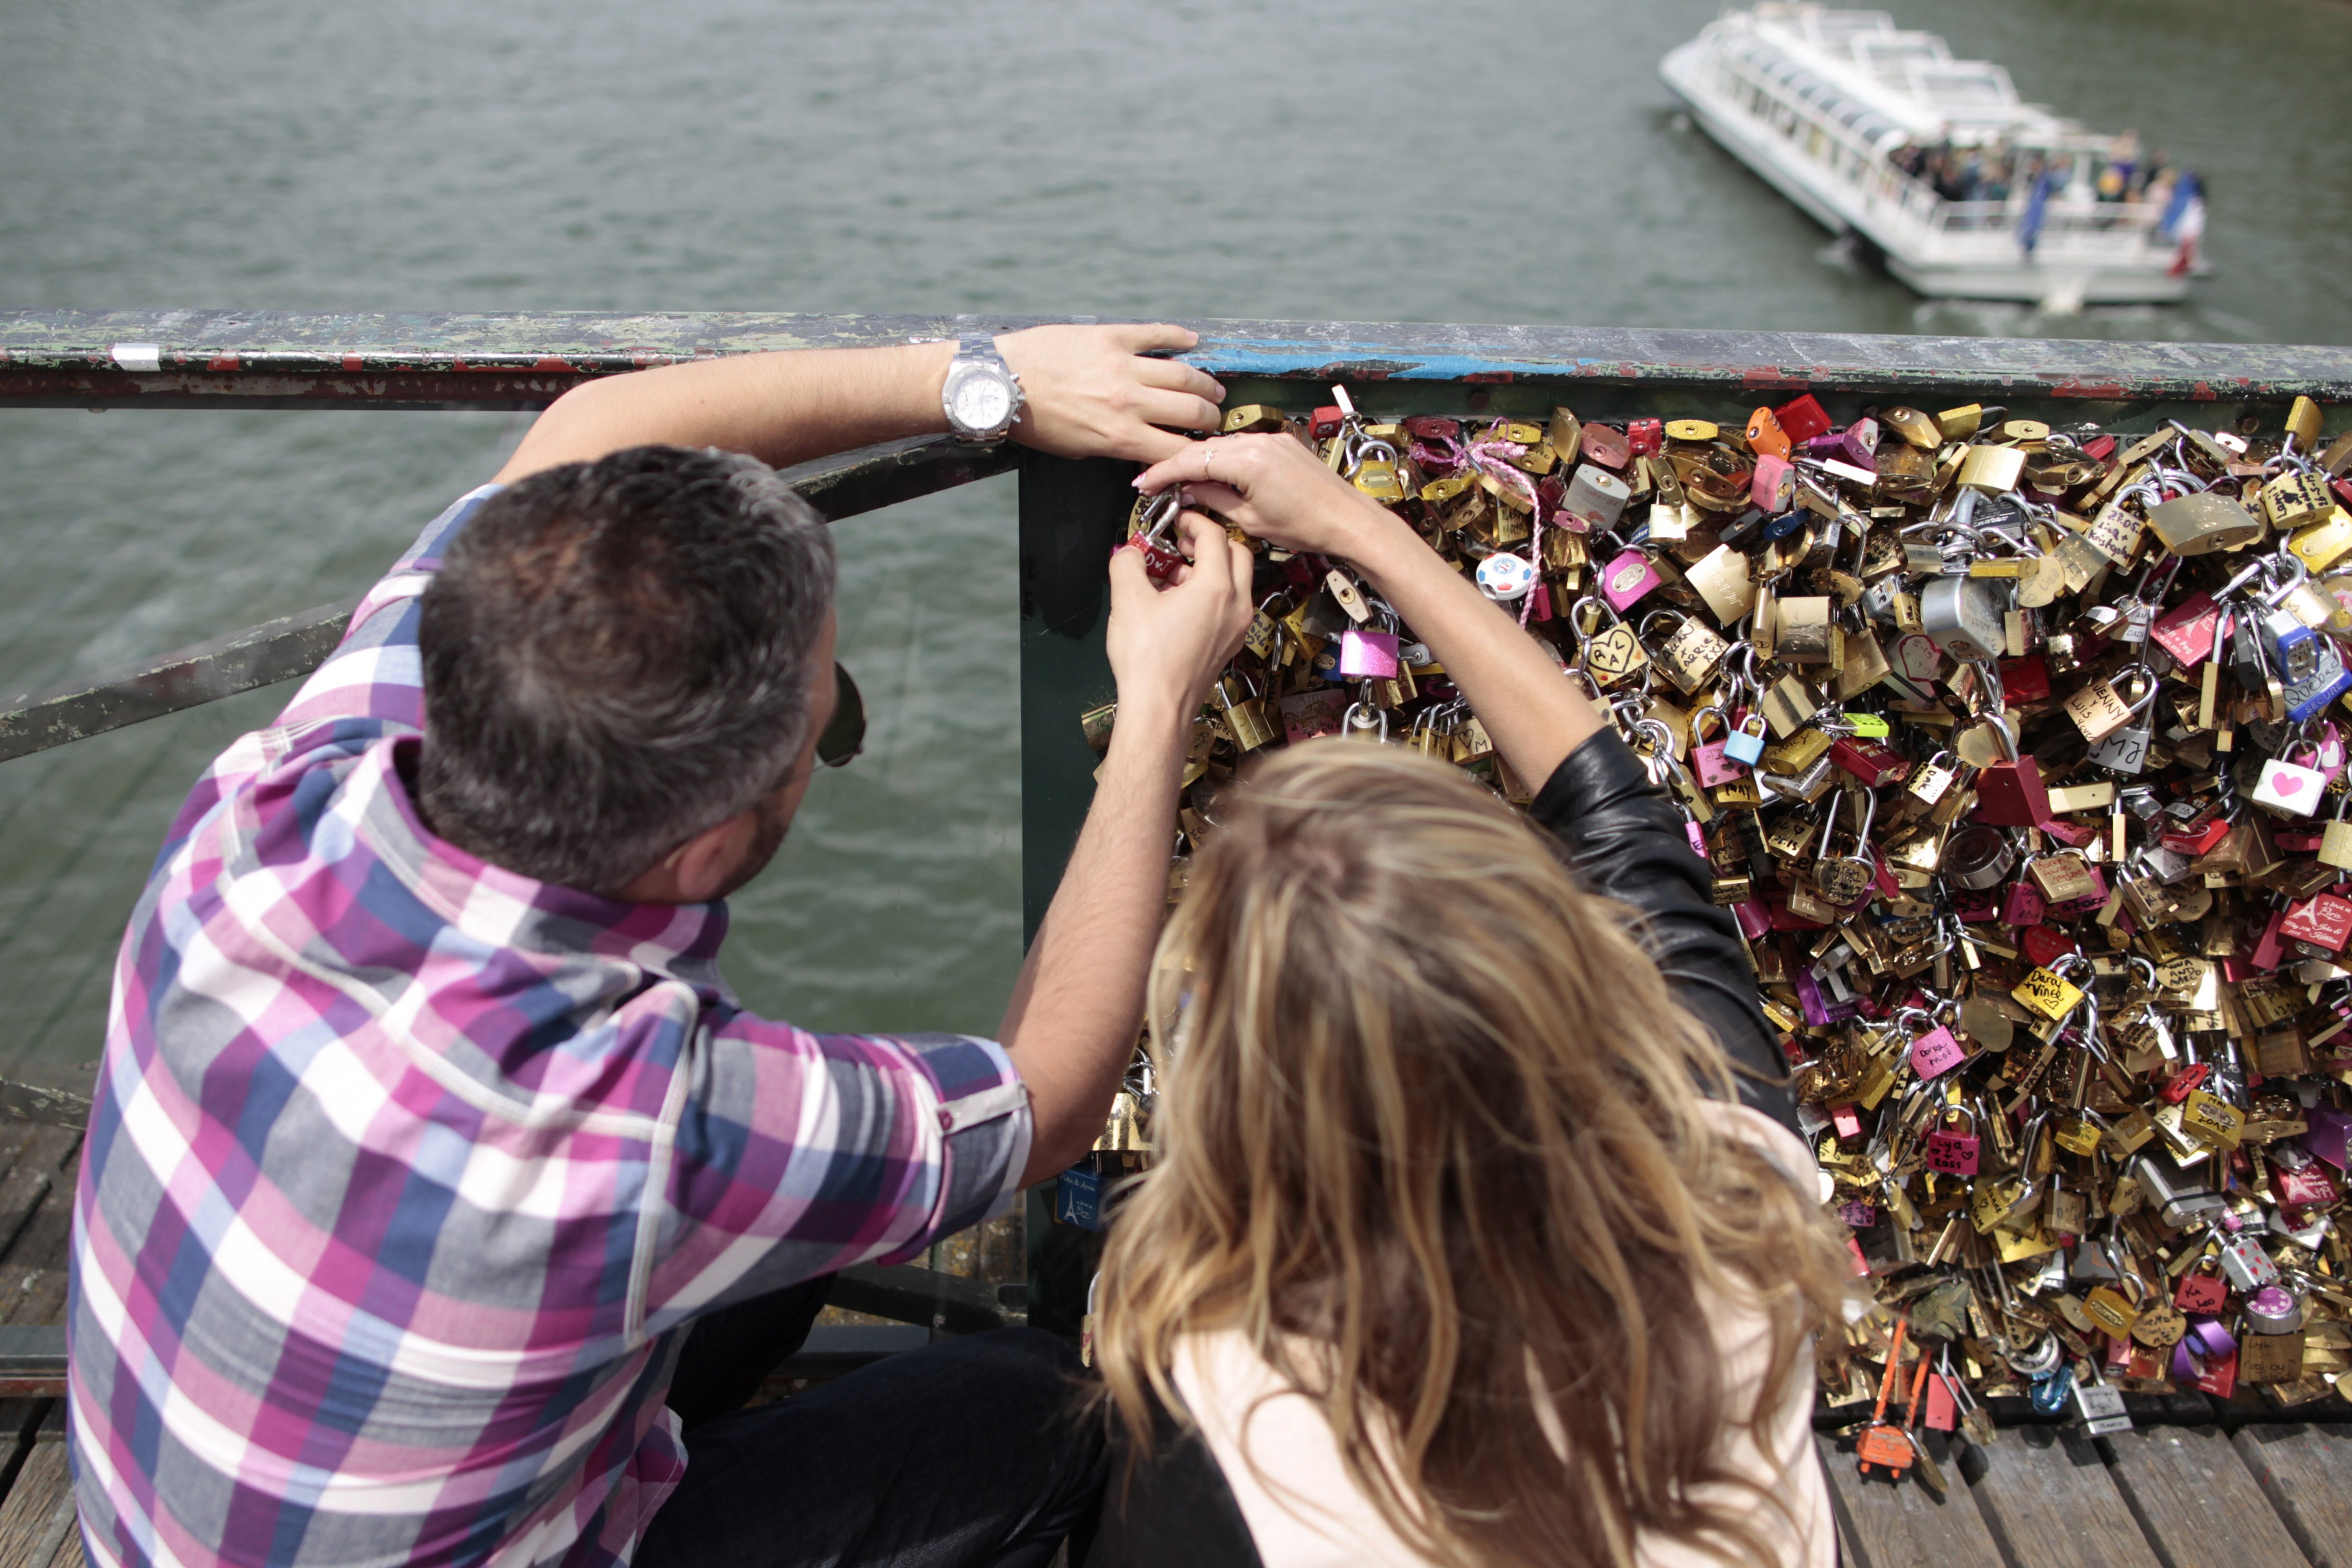 A couple locks a padlock on the Pont des Arts on May 29, 2015, in Paris as the Paris municipality announced that the bridge's fences have to be removed due to the weight of the padlocks put by tourists to symbolize everlasting love (Charly Triballeau—AFP/Getty Images)